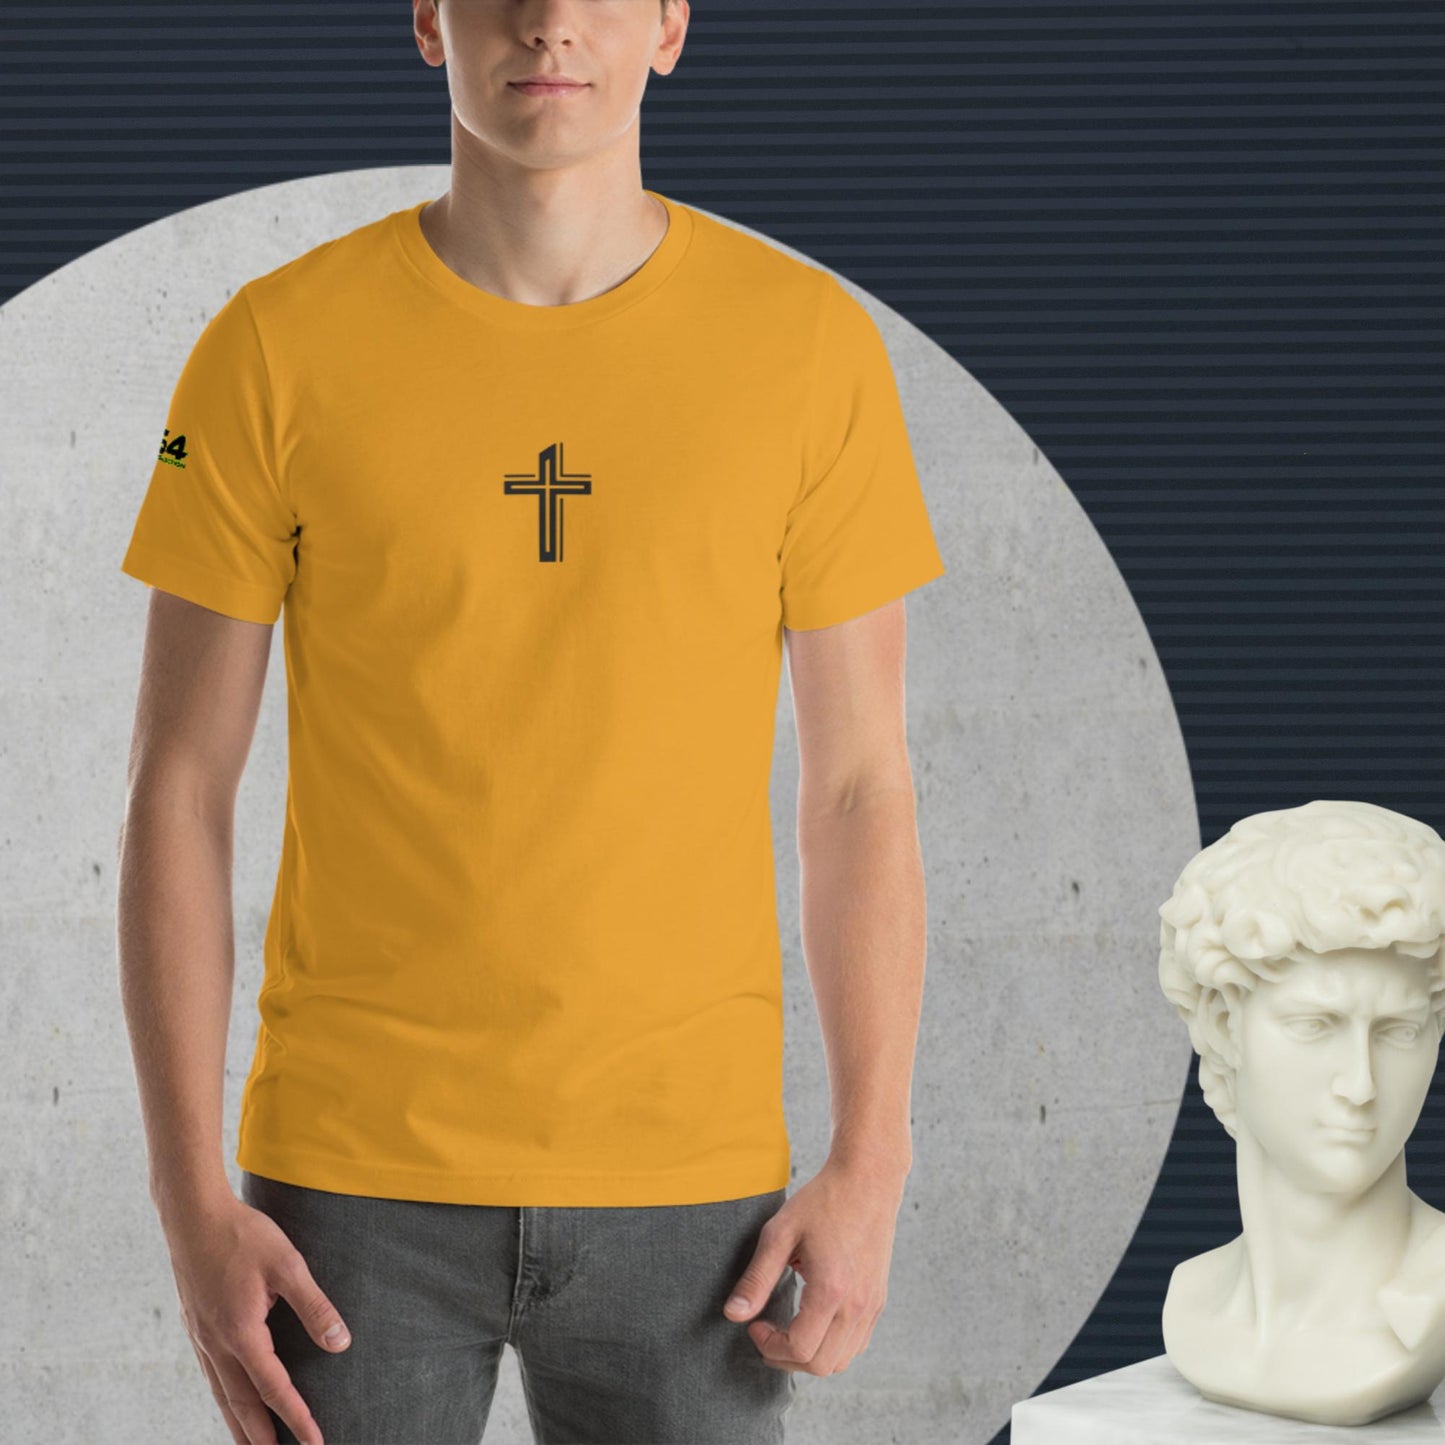 Franciscan 954 Collection Unisex t-shirt